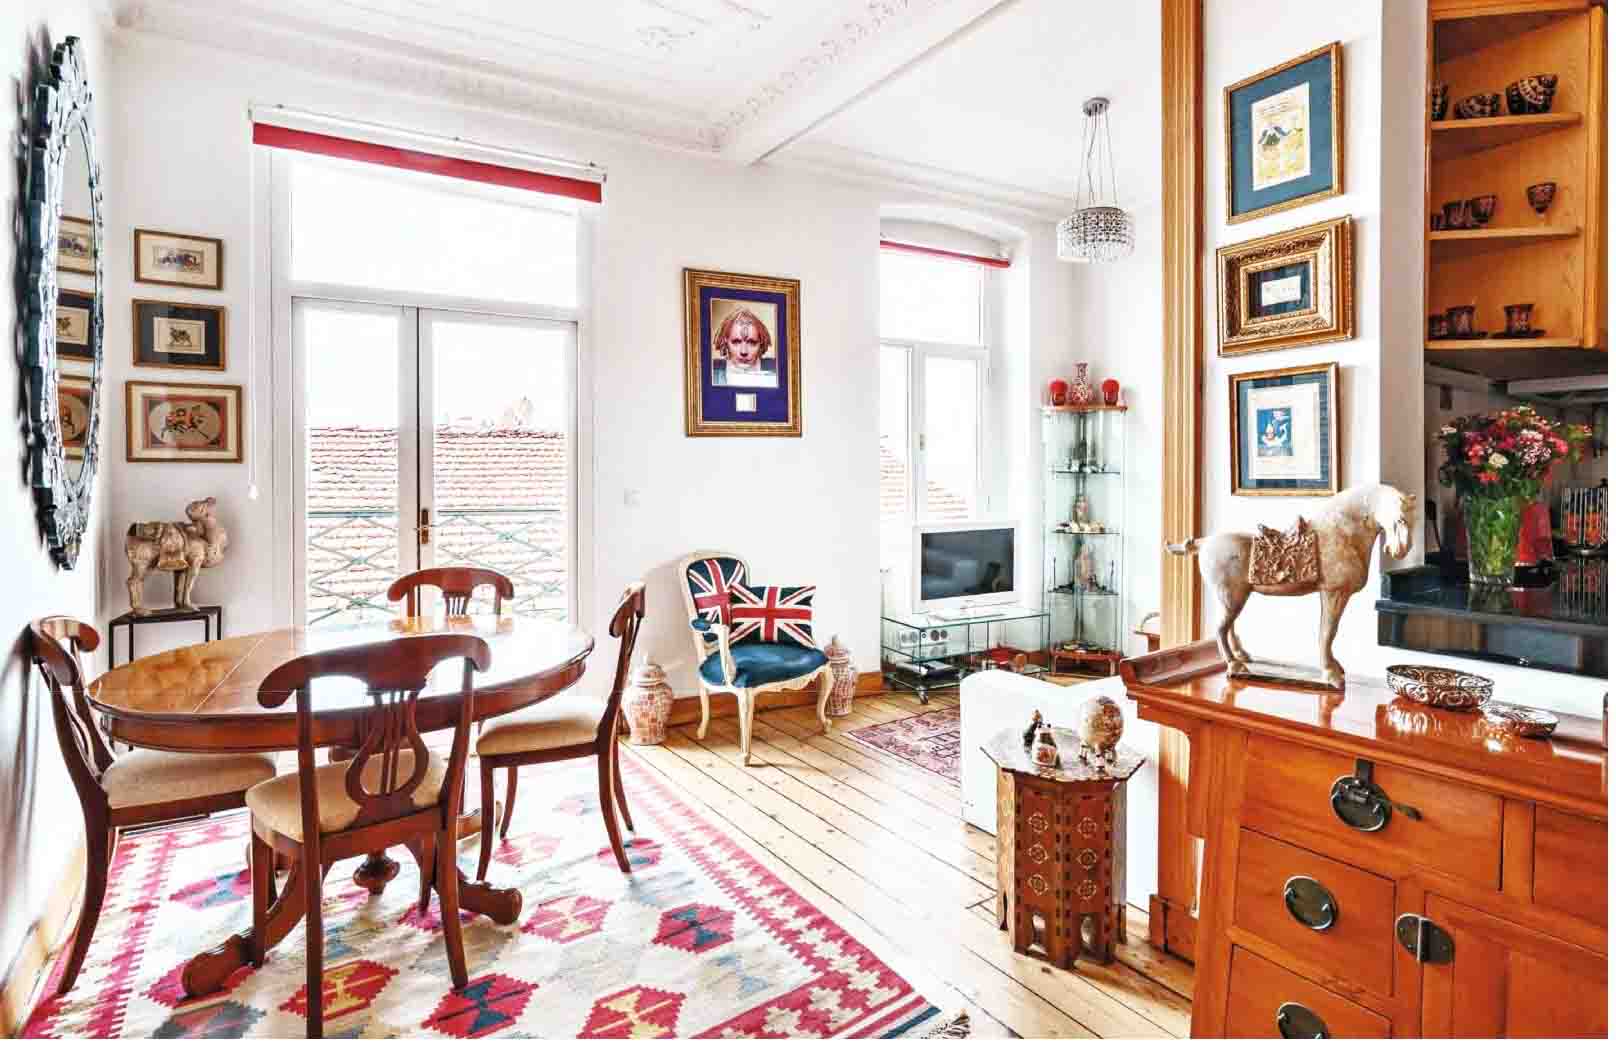 3 bed istanbul apartment for sale beyoglu central